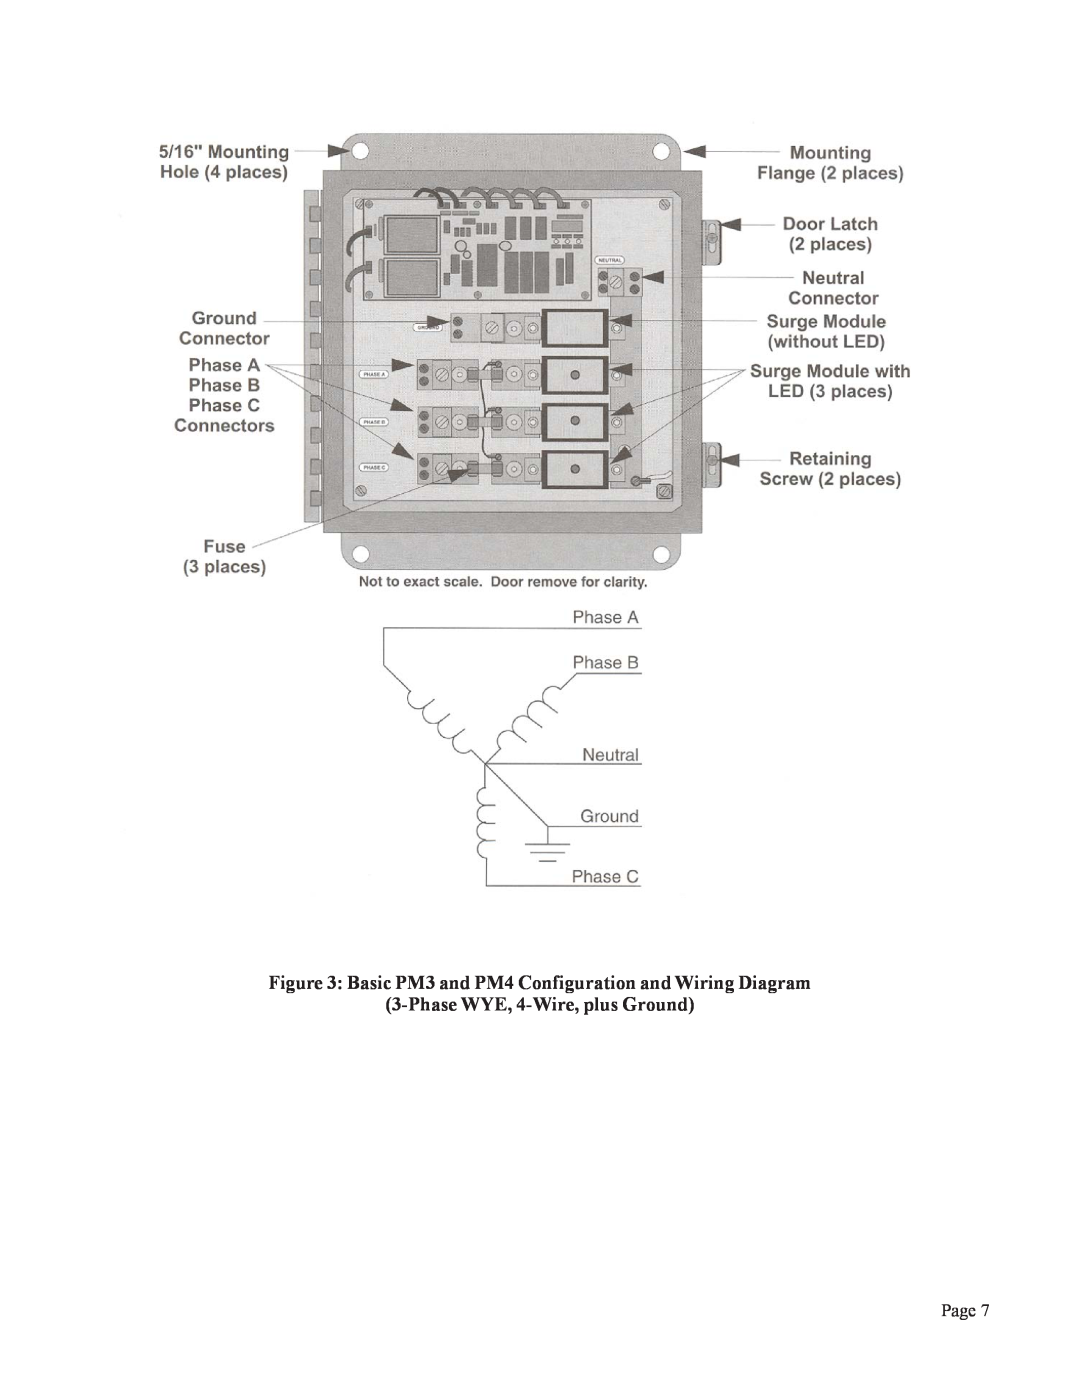 American Power Conversion Basic PM3 and PM4 Configuration and Wiring Diagram, Phase WYE, 4-Wire, plus Ground, Page 